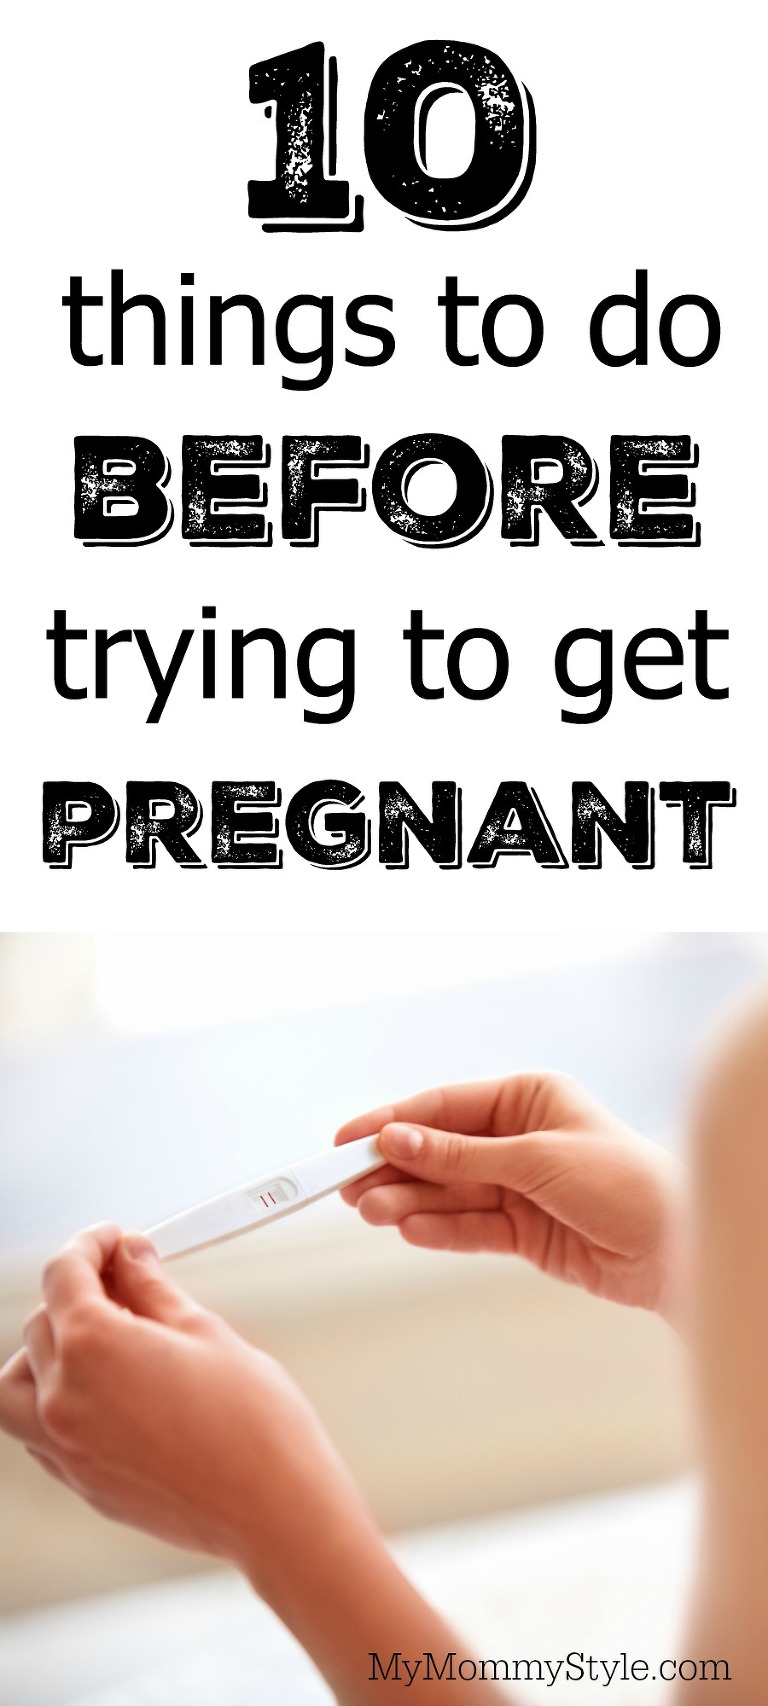 What are the things to do to get pregnant